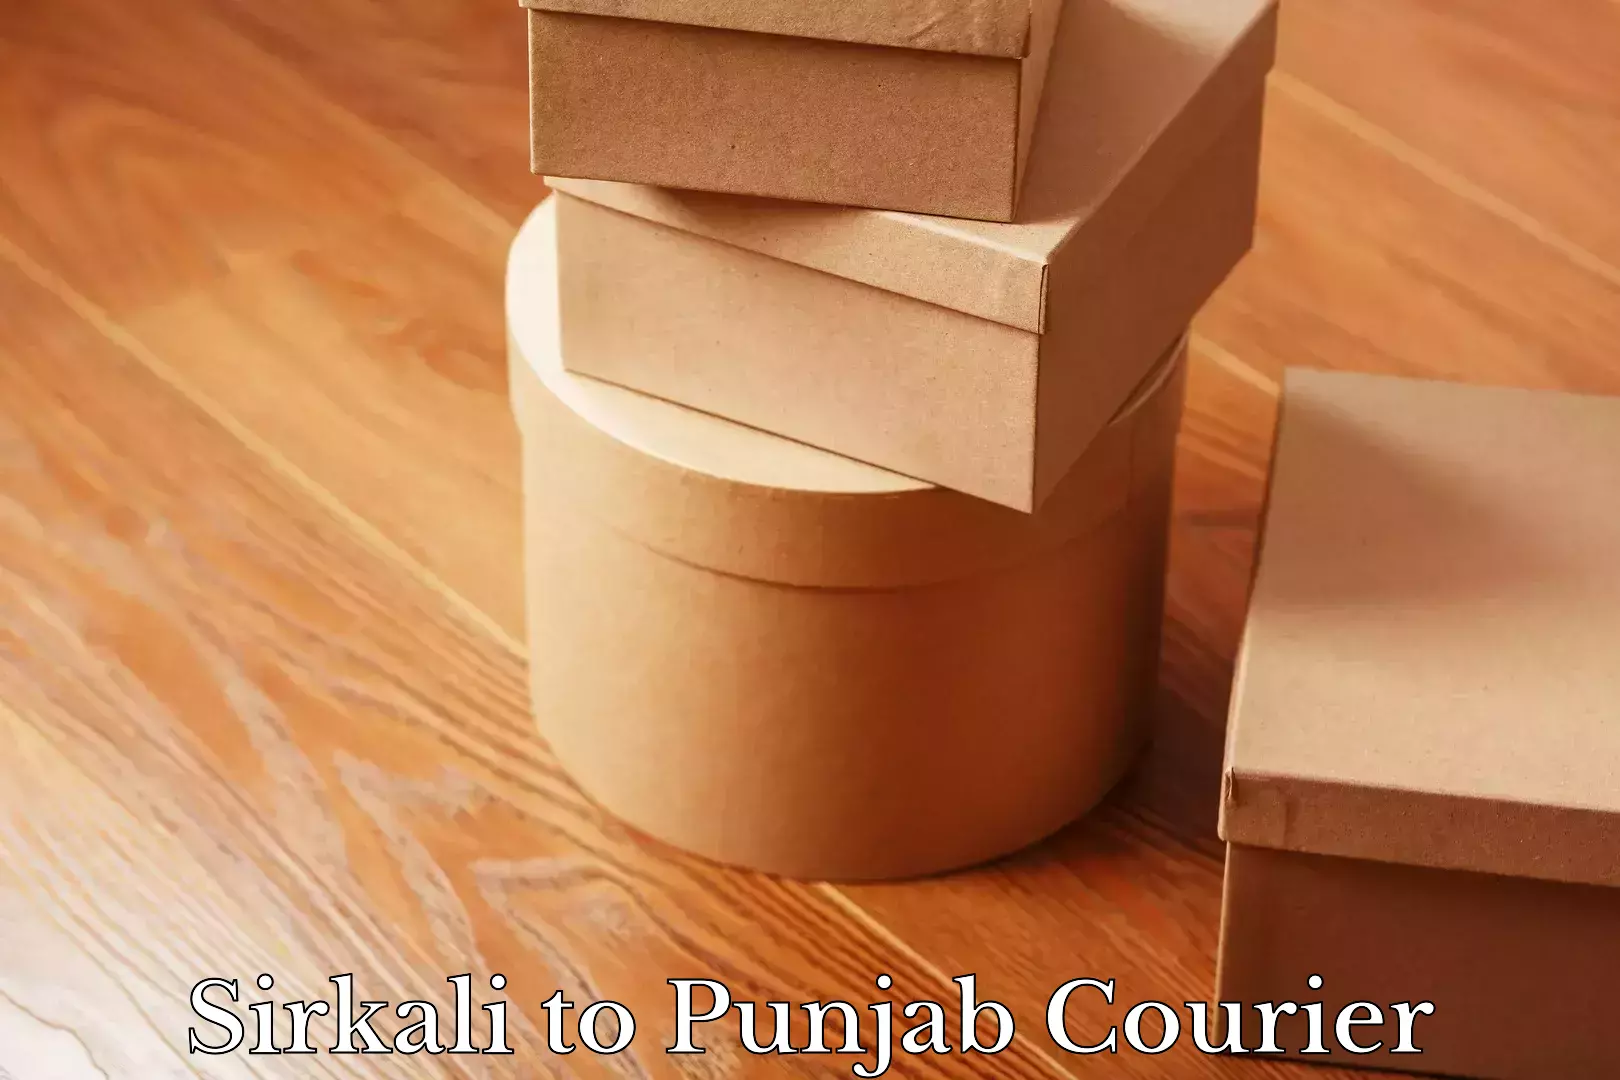 Local courier options Sirkali to Punjab